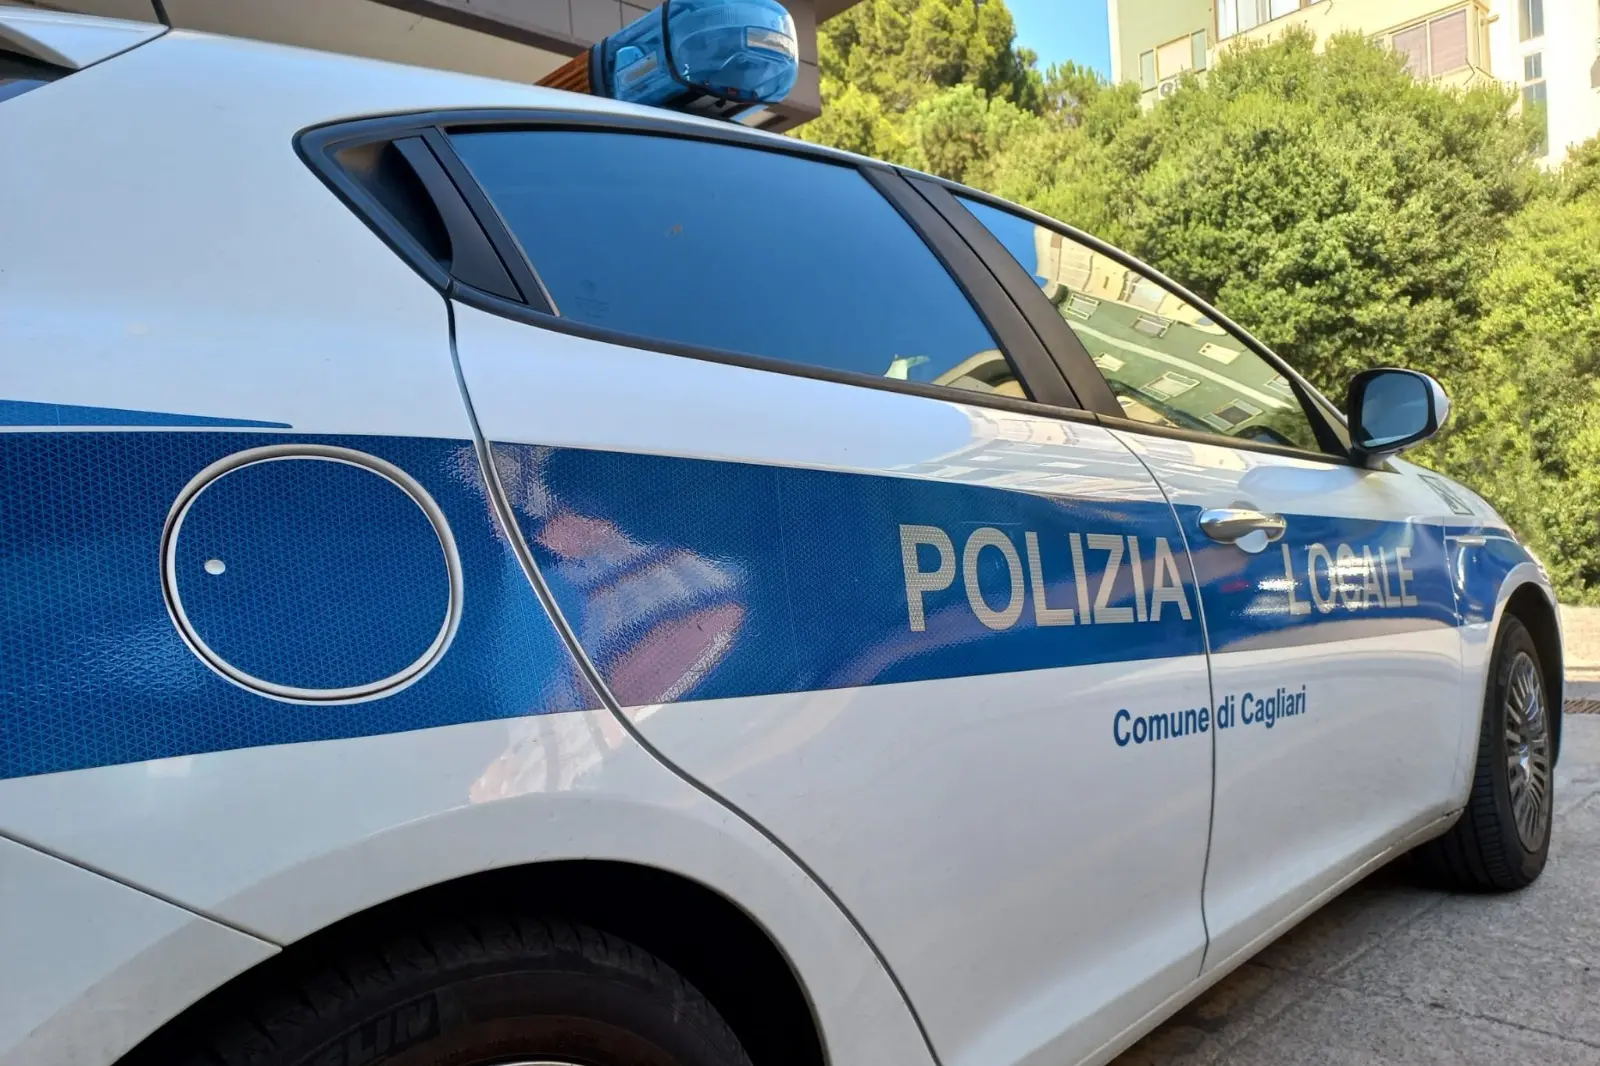 Insults to the local police, reported 56 years old in Cagliari (photo local police)